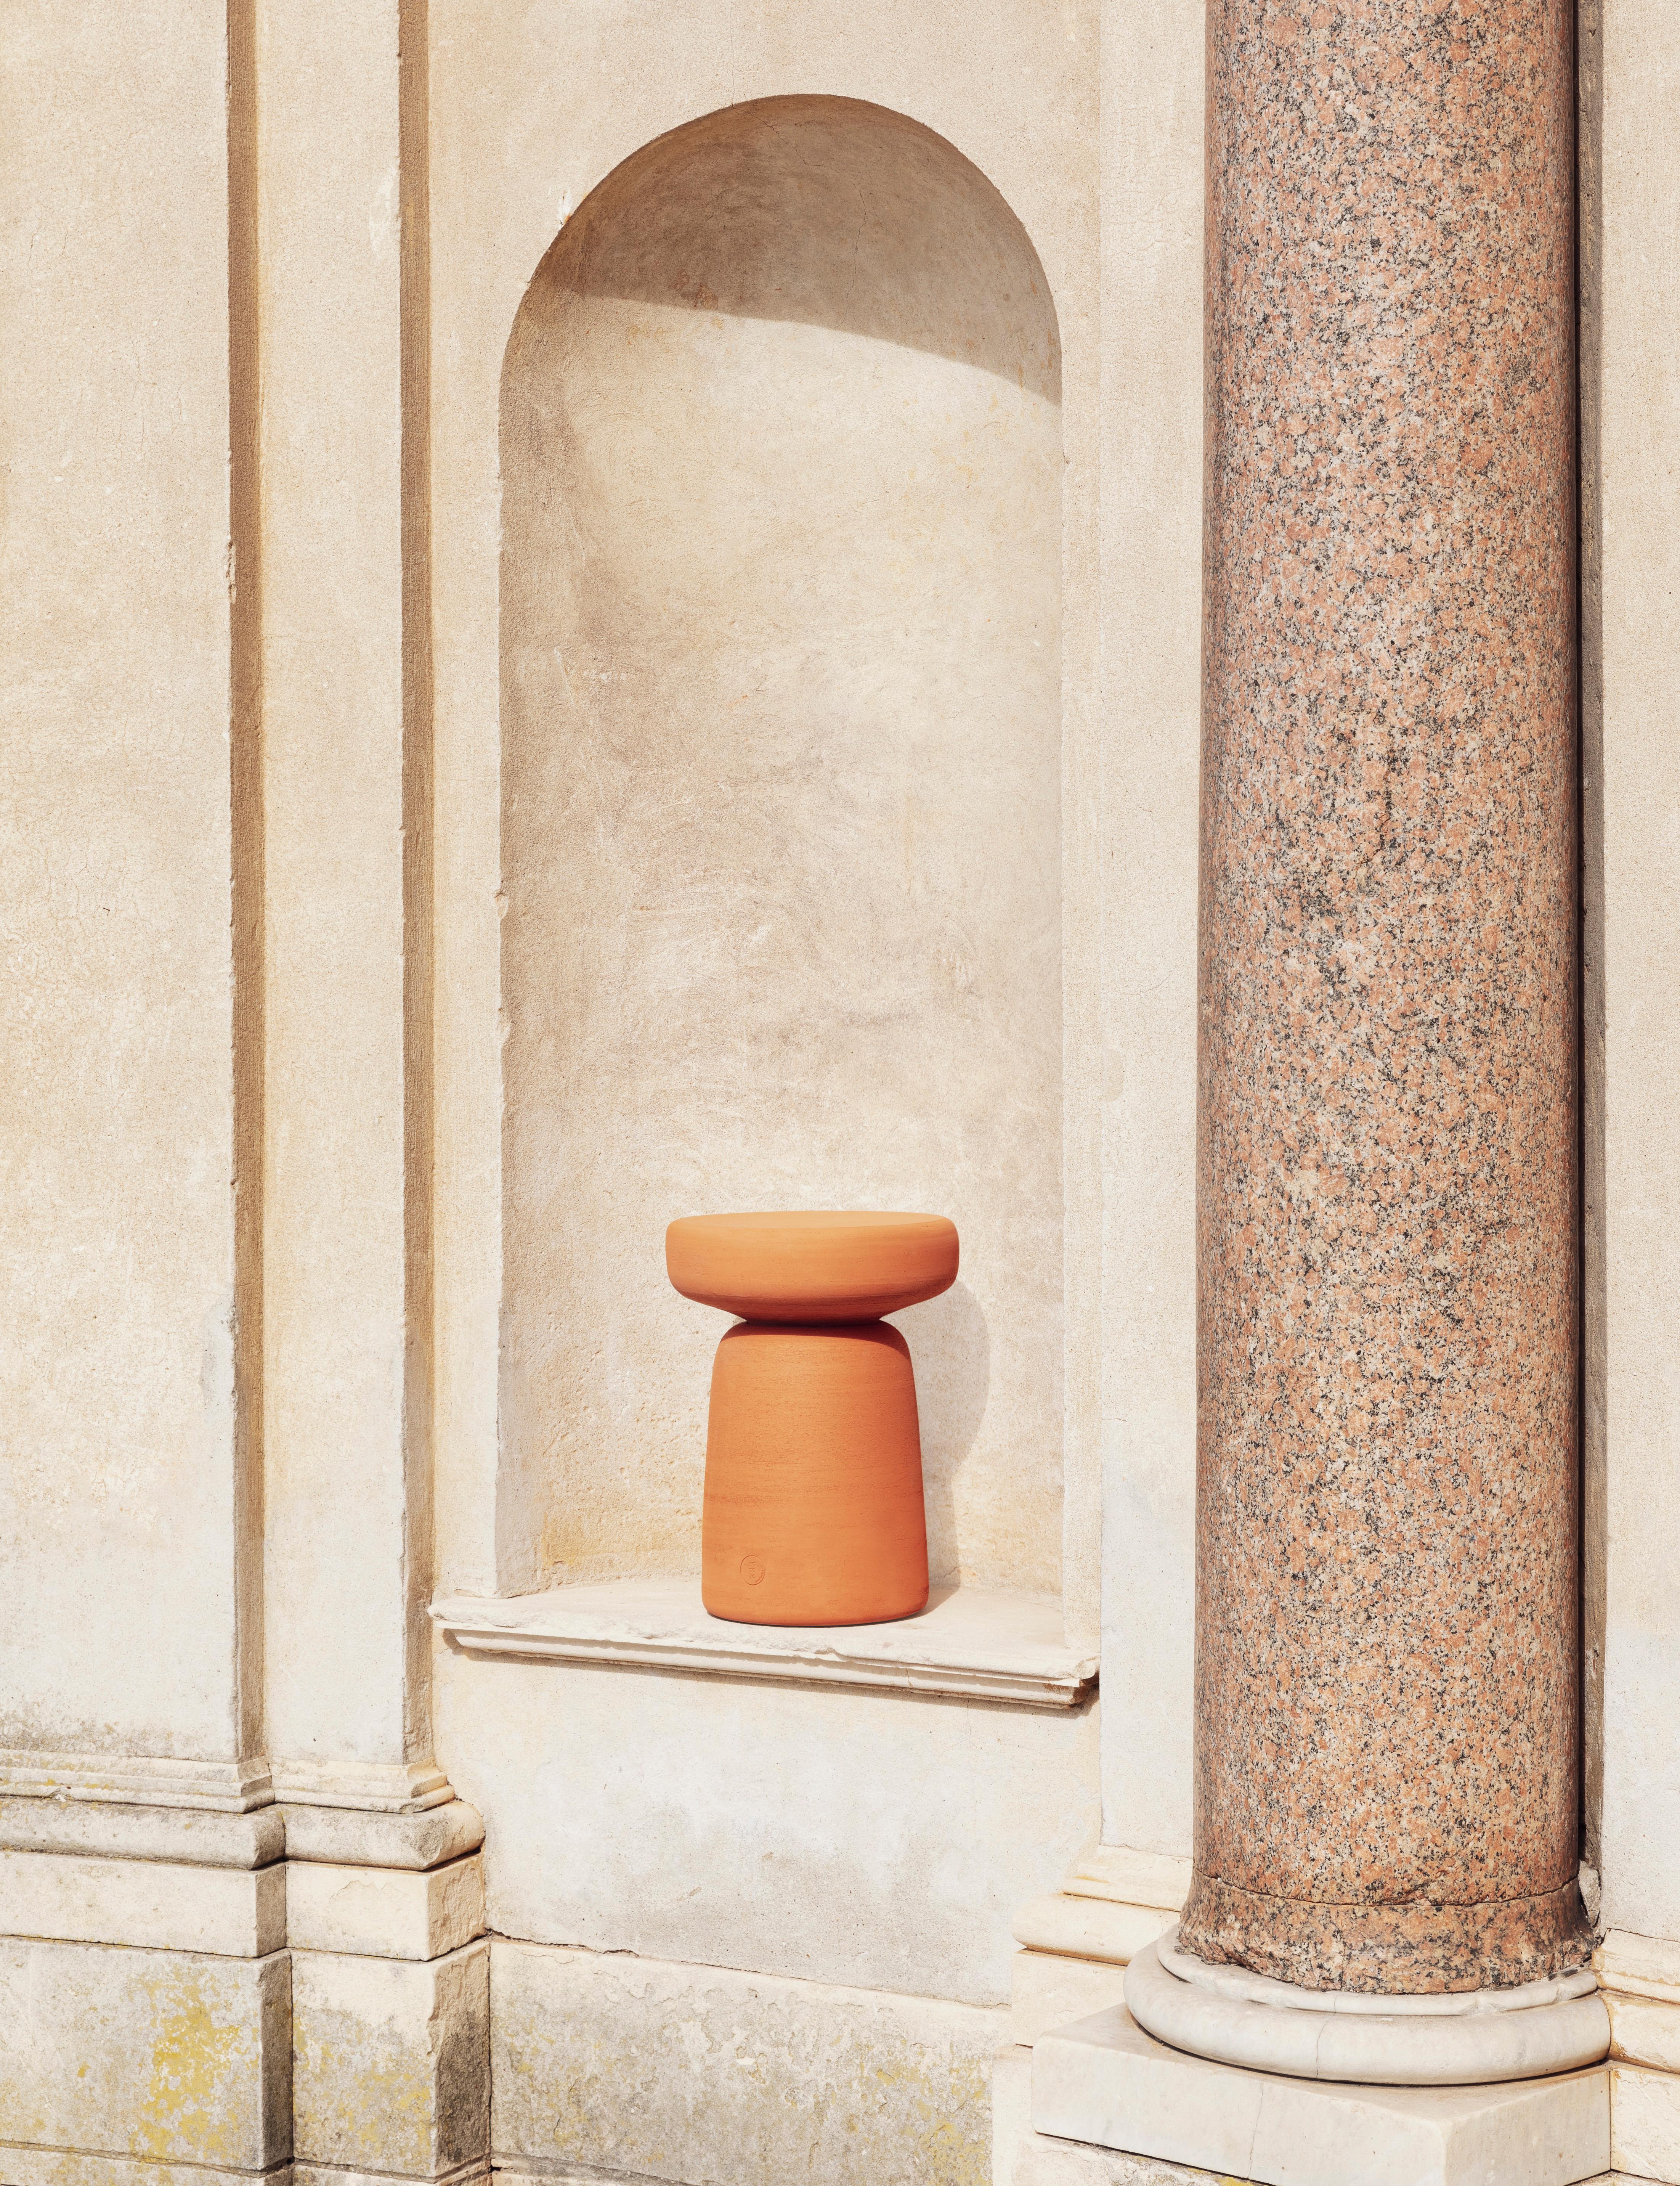 Clay Tototo' Coffee Table in Hard Rock Terracotta by Paolo Cappello and Simone Sabati For Sale